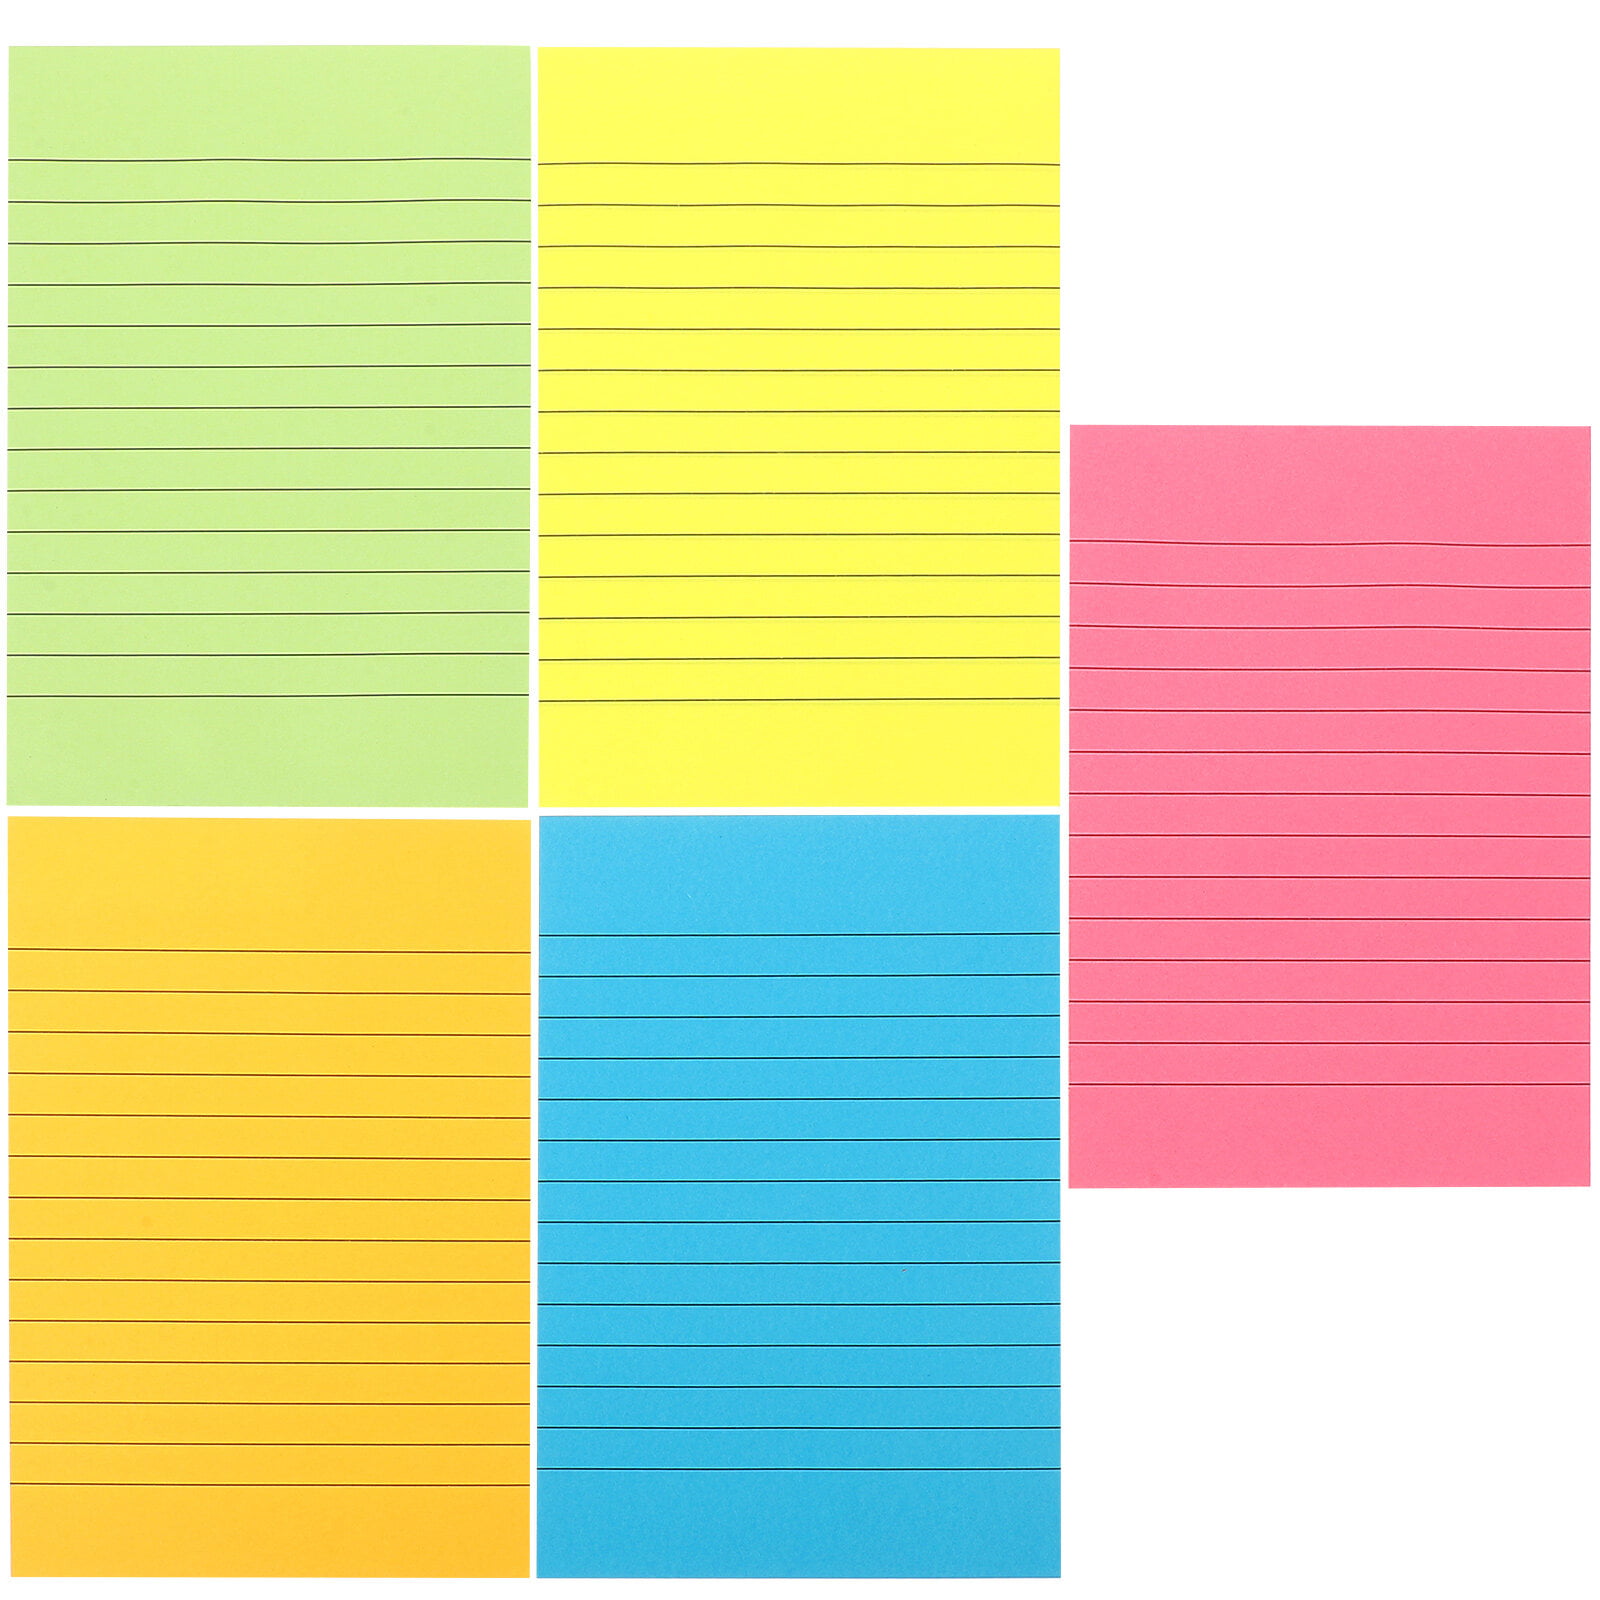 Post-it Notes in Marseille Colors, Value Pack, 1.5x2 - 24/Pack - Sam's  Club